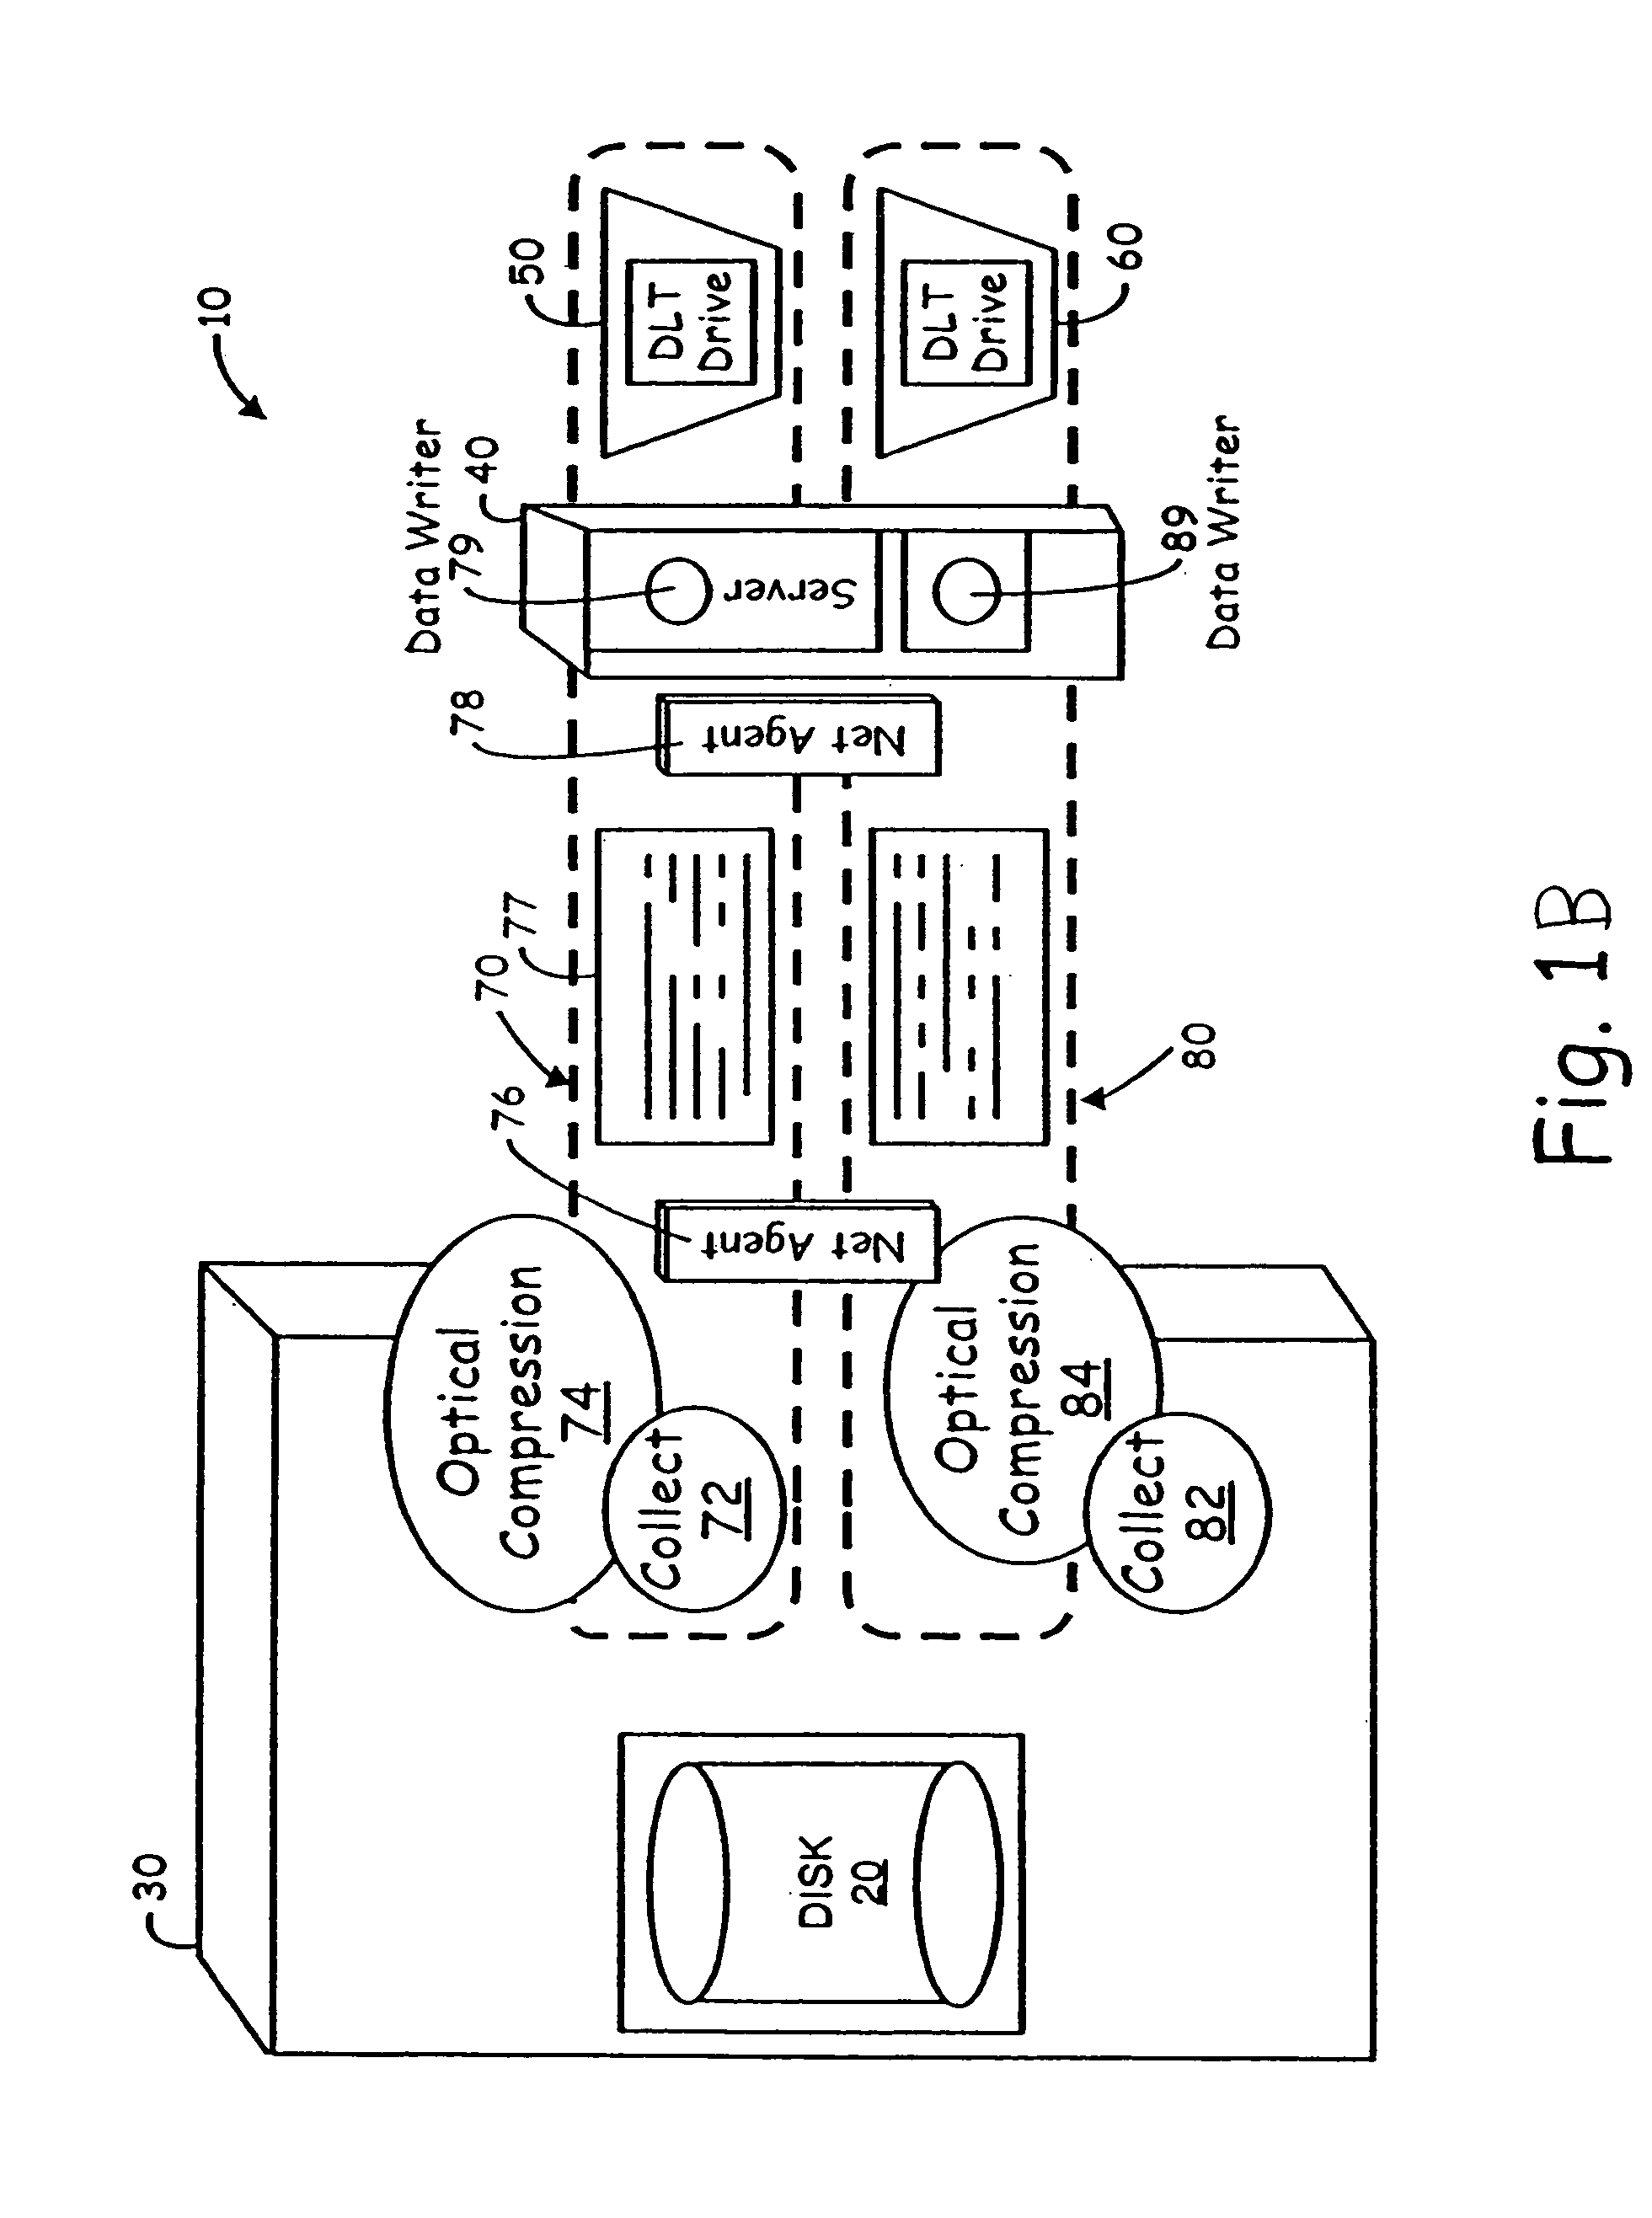 System and method for providing encryption in a storage network by storing a secured encryption key with encrypted archive data in an archive storage device